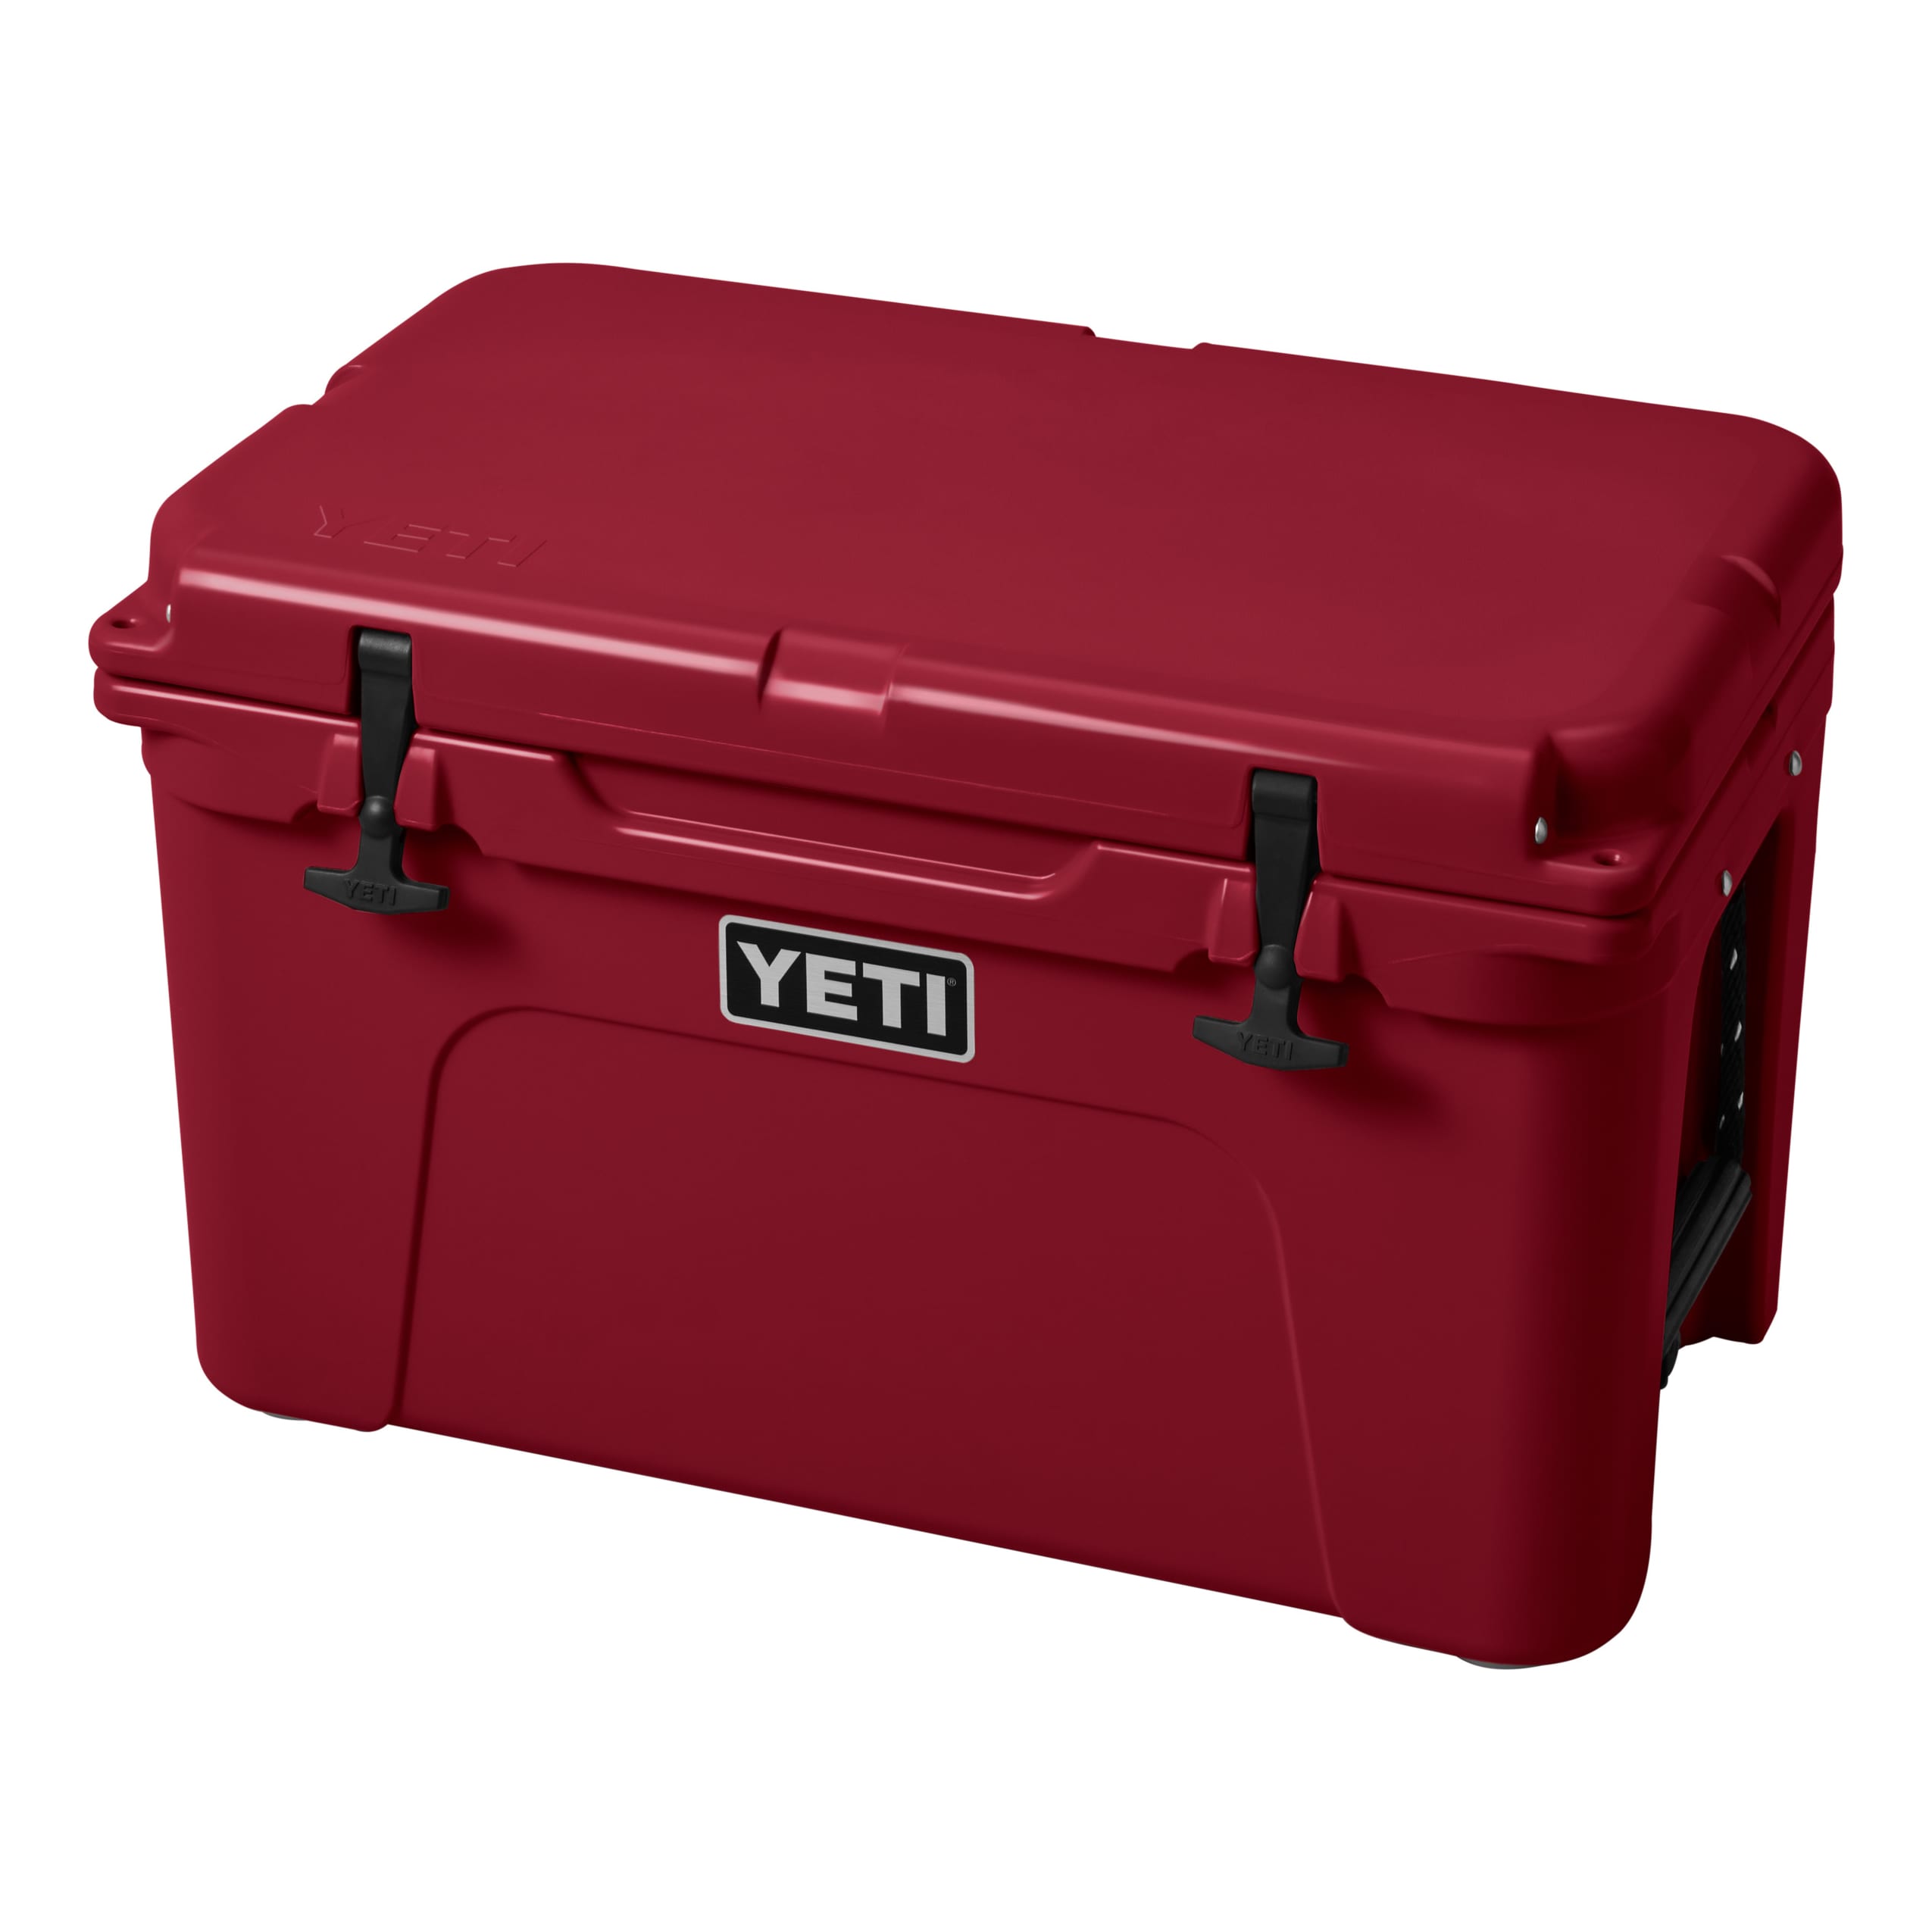 Yeti Coolers Tundra 45 Series Cooler - Harvest Red